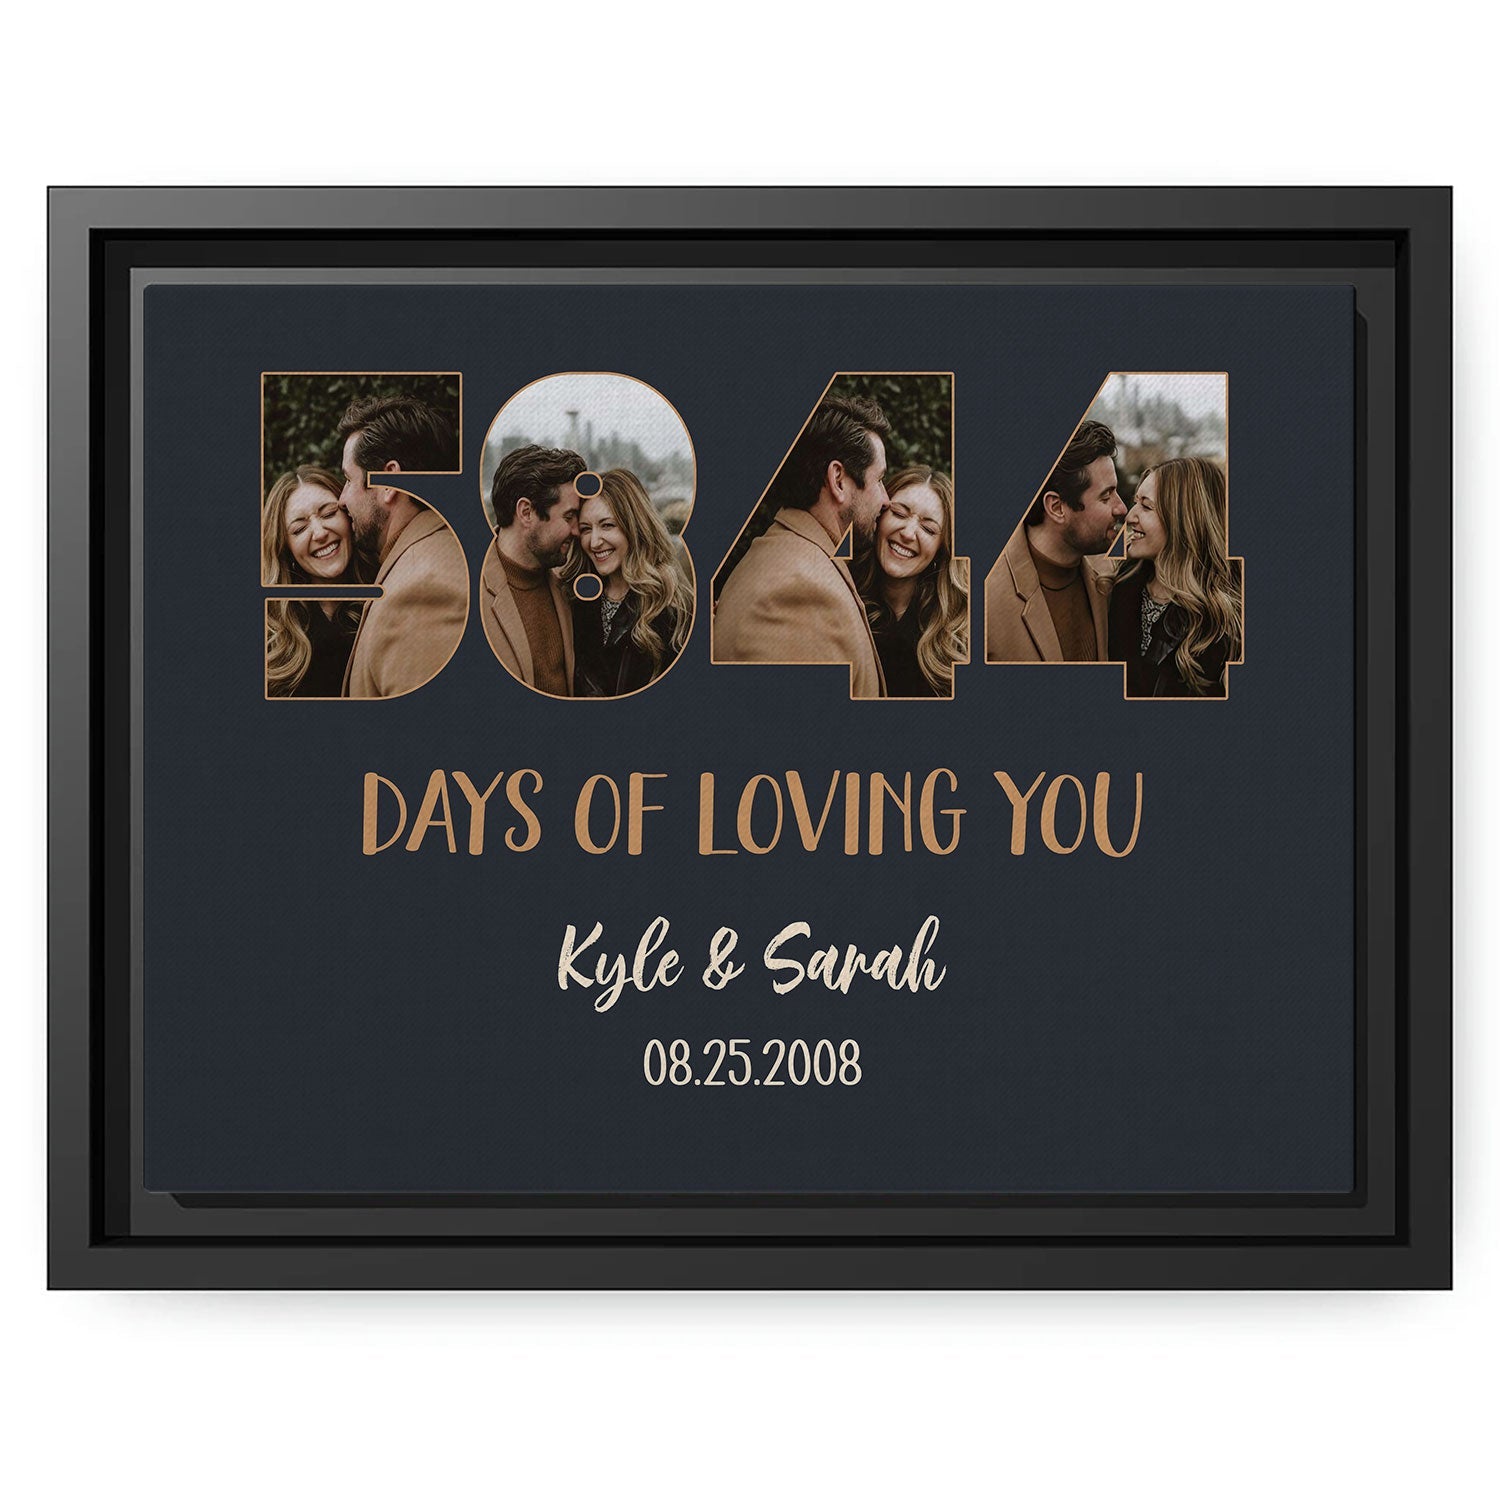 5844 Days Of Loving You - Personalized 16 Year Anniversary gift For Husband or Wife - Custom Canvas Print - MyMindfulGifts